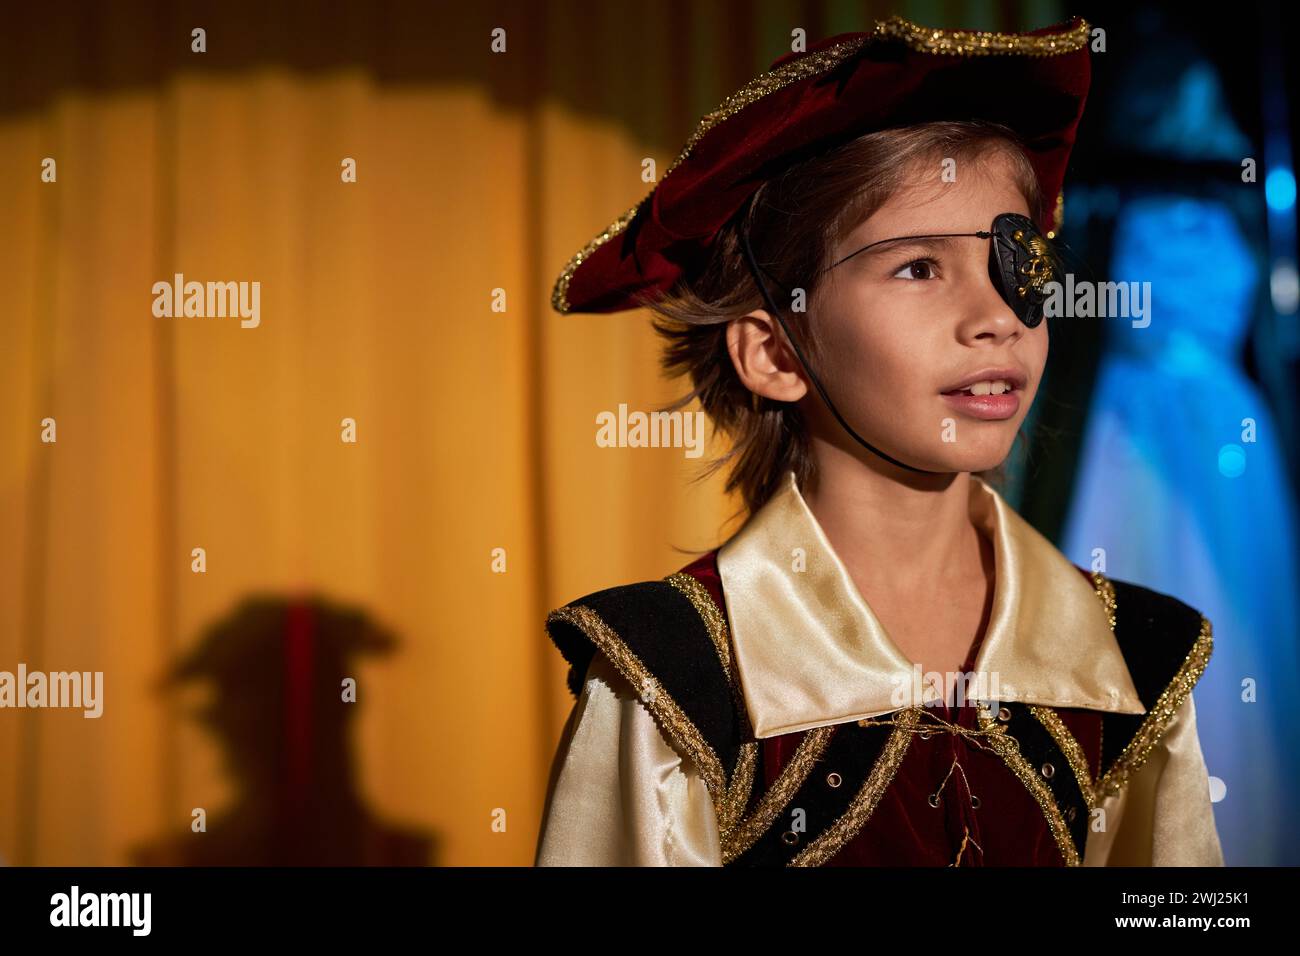 Portrait of young boy wearing pirate costume performing on stage in spotlight, copy space Stock Photo